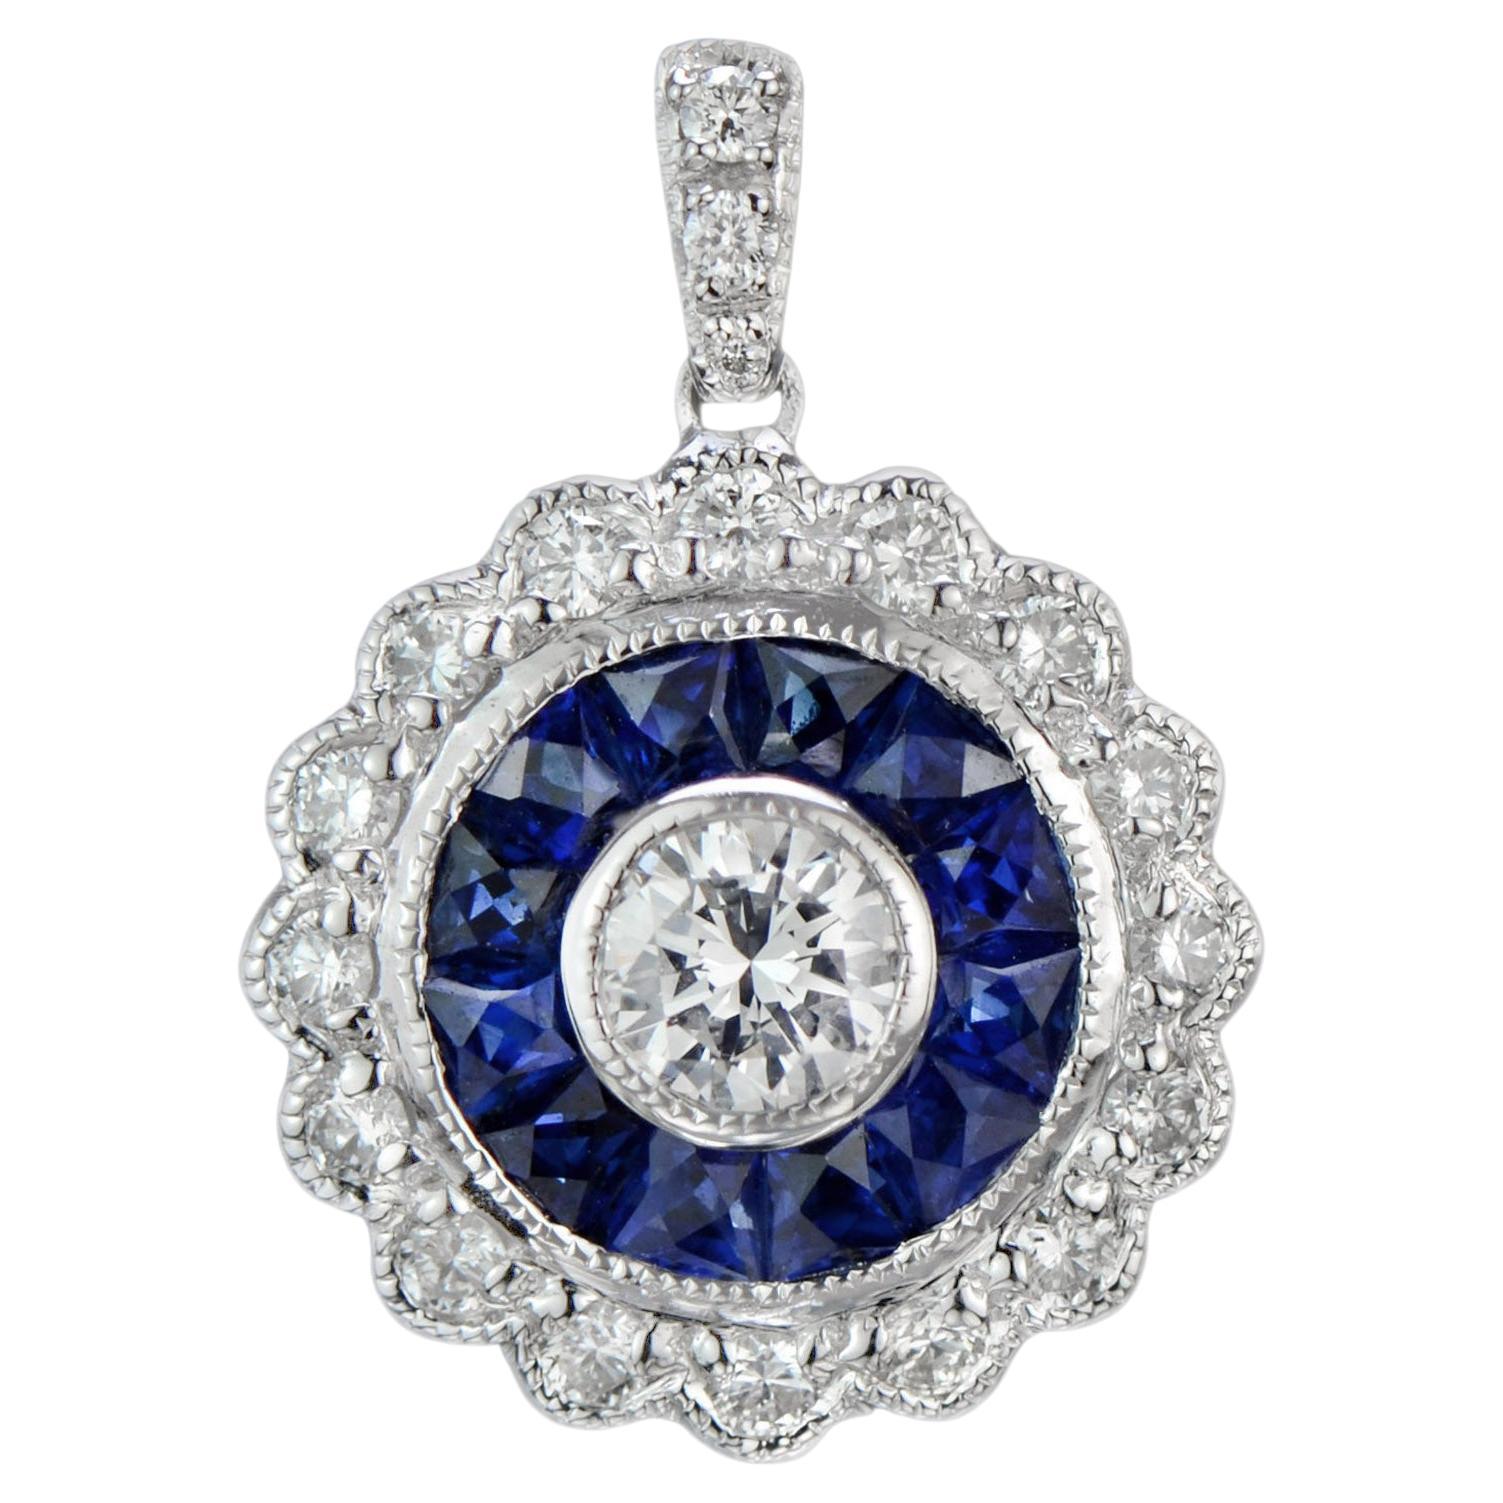 4mm Round Diamond and Sapphire Wavy Halo Pendant in 18K White Gold